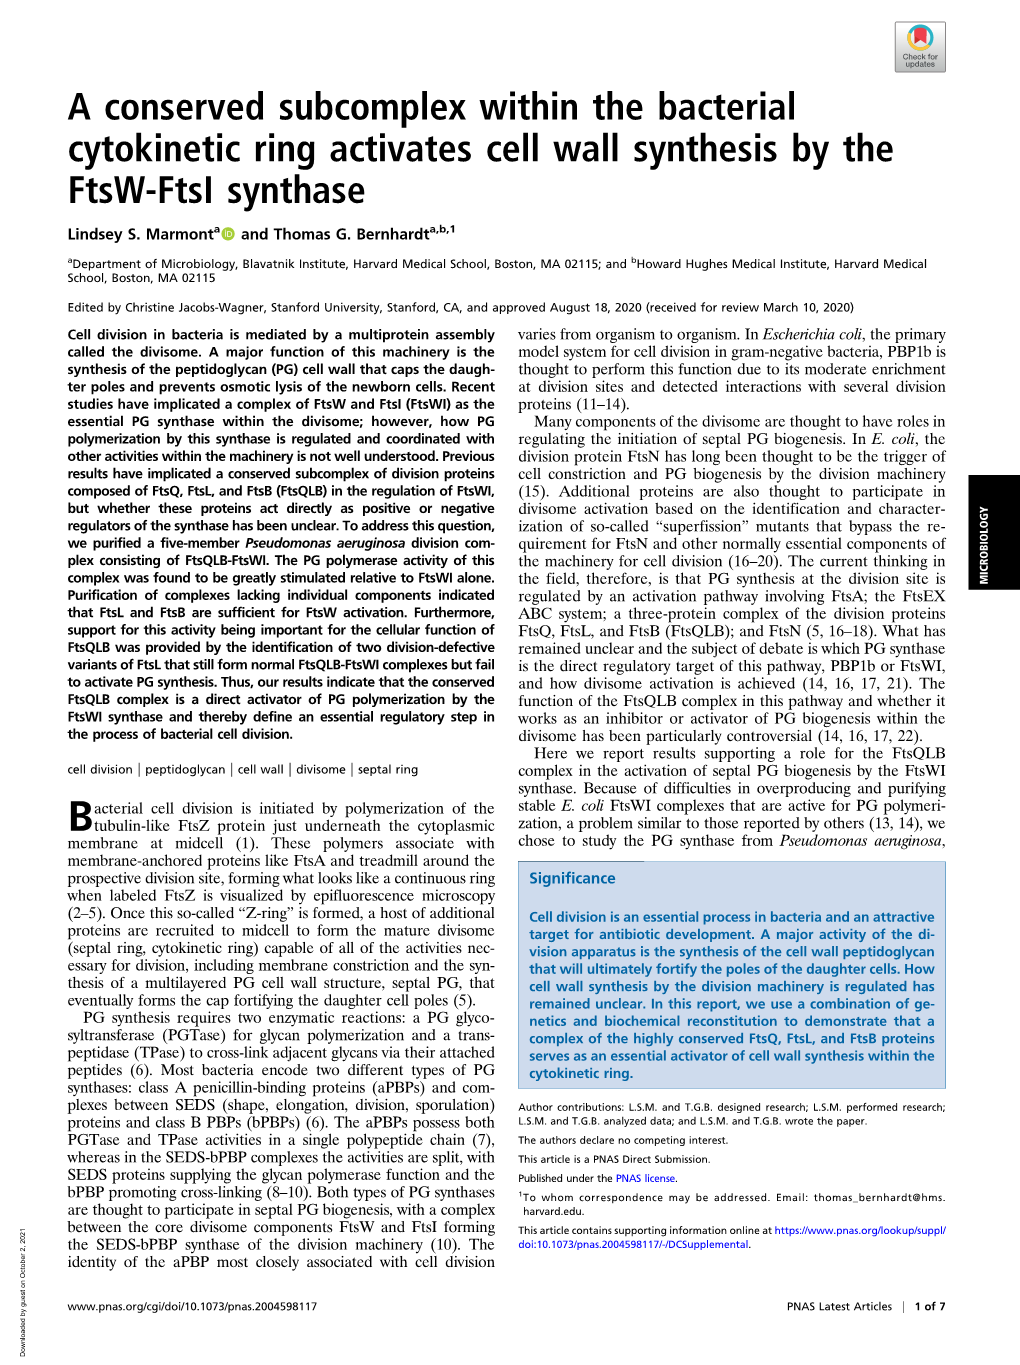 A Conserved Subcomplex Within the Bacterial Cytokinetic Ring Activates Cell Wall Synthesis by the Ftsw-Ftsi Synthase